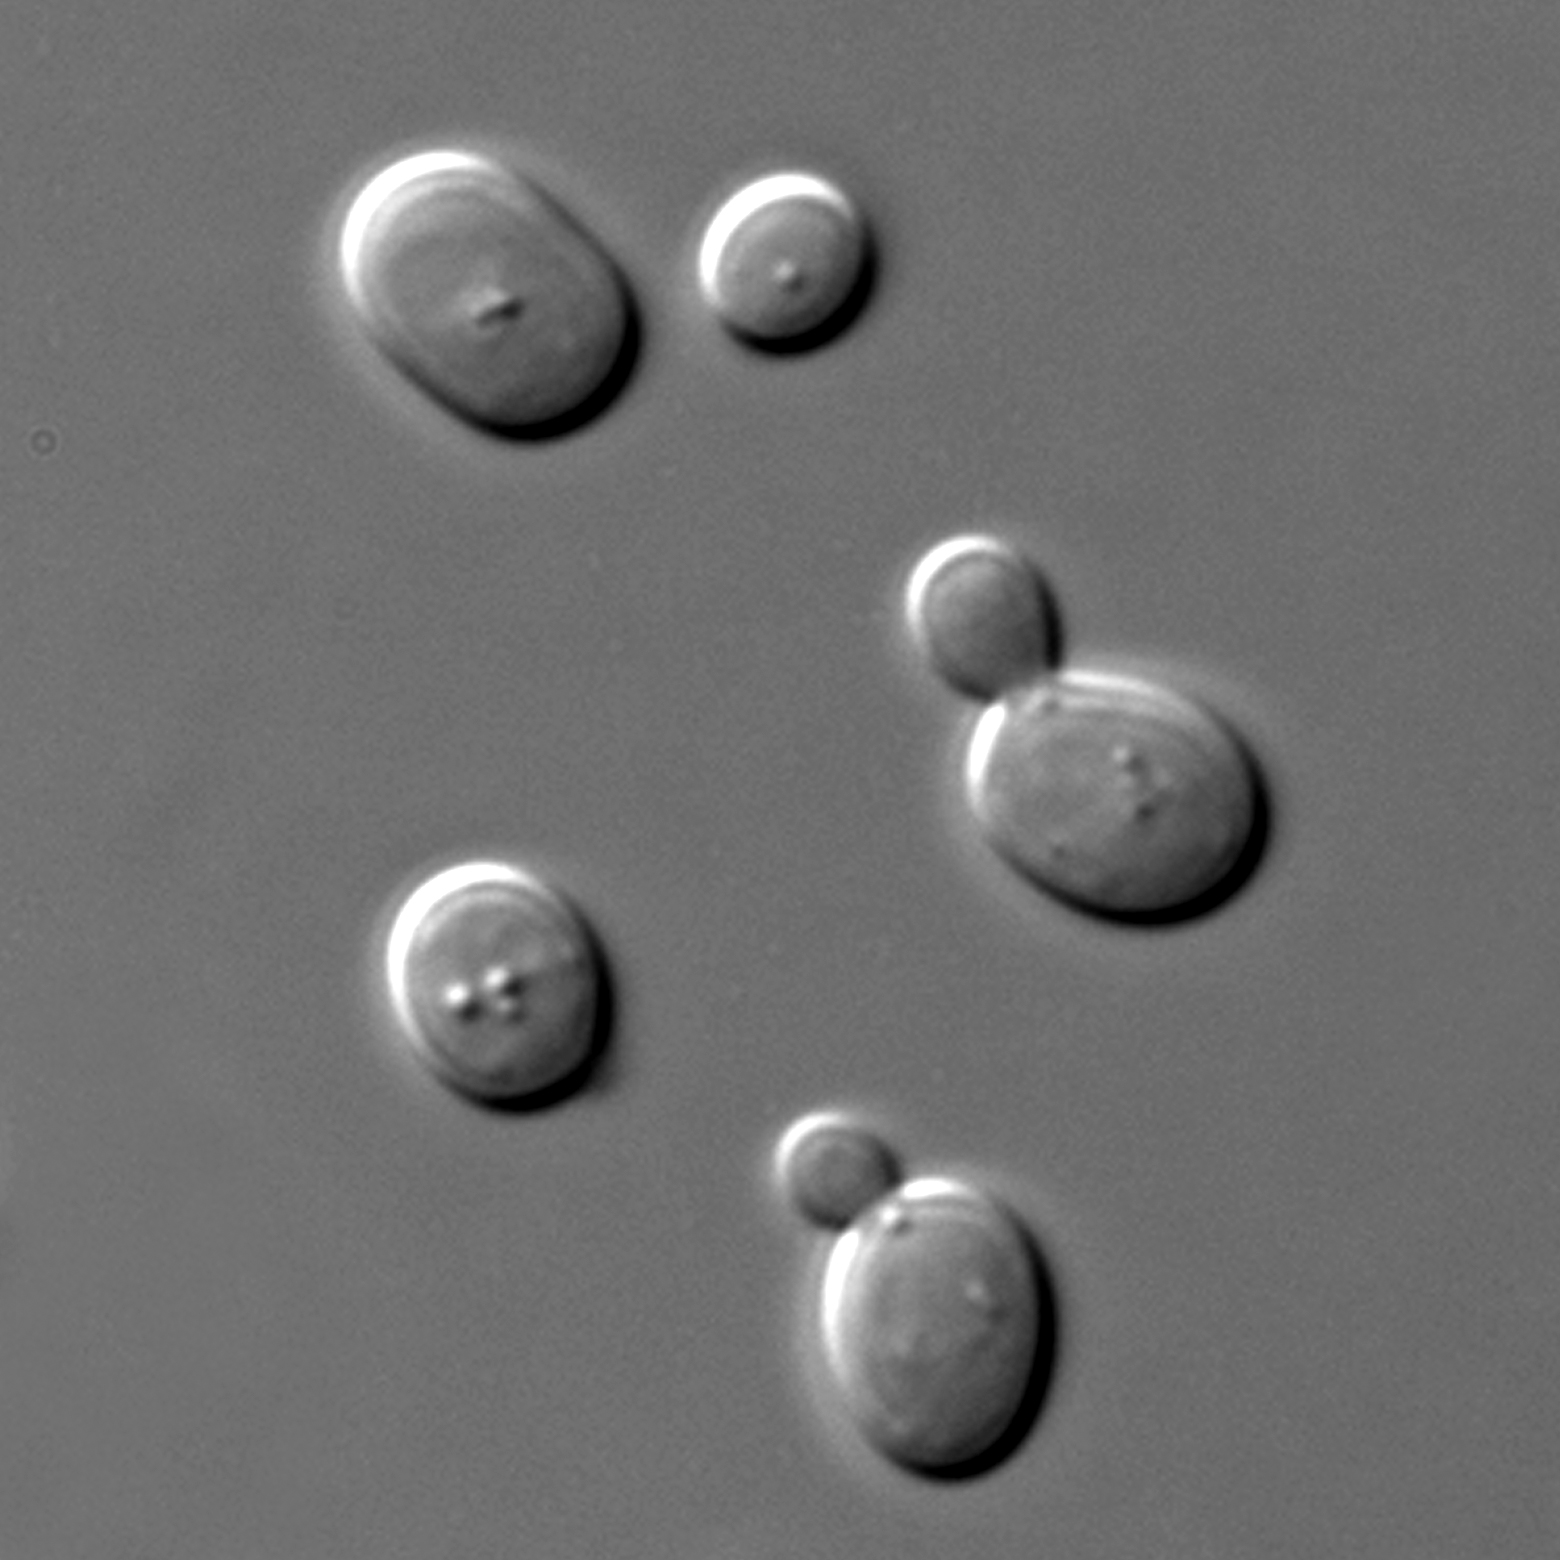 Single celled yeast seen under a microscope.